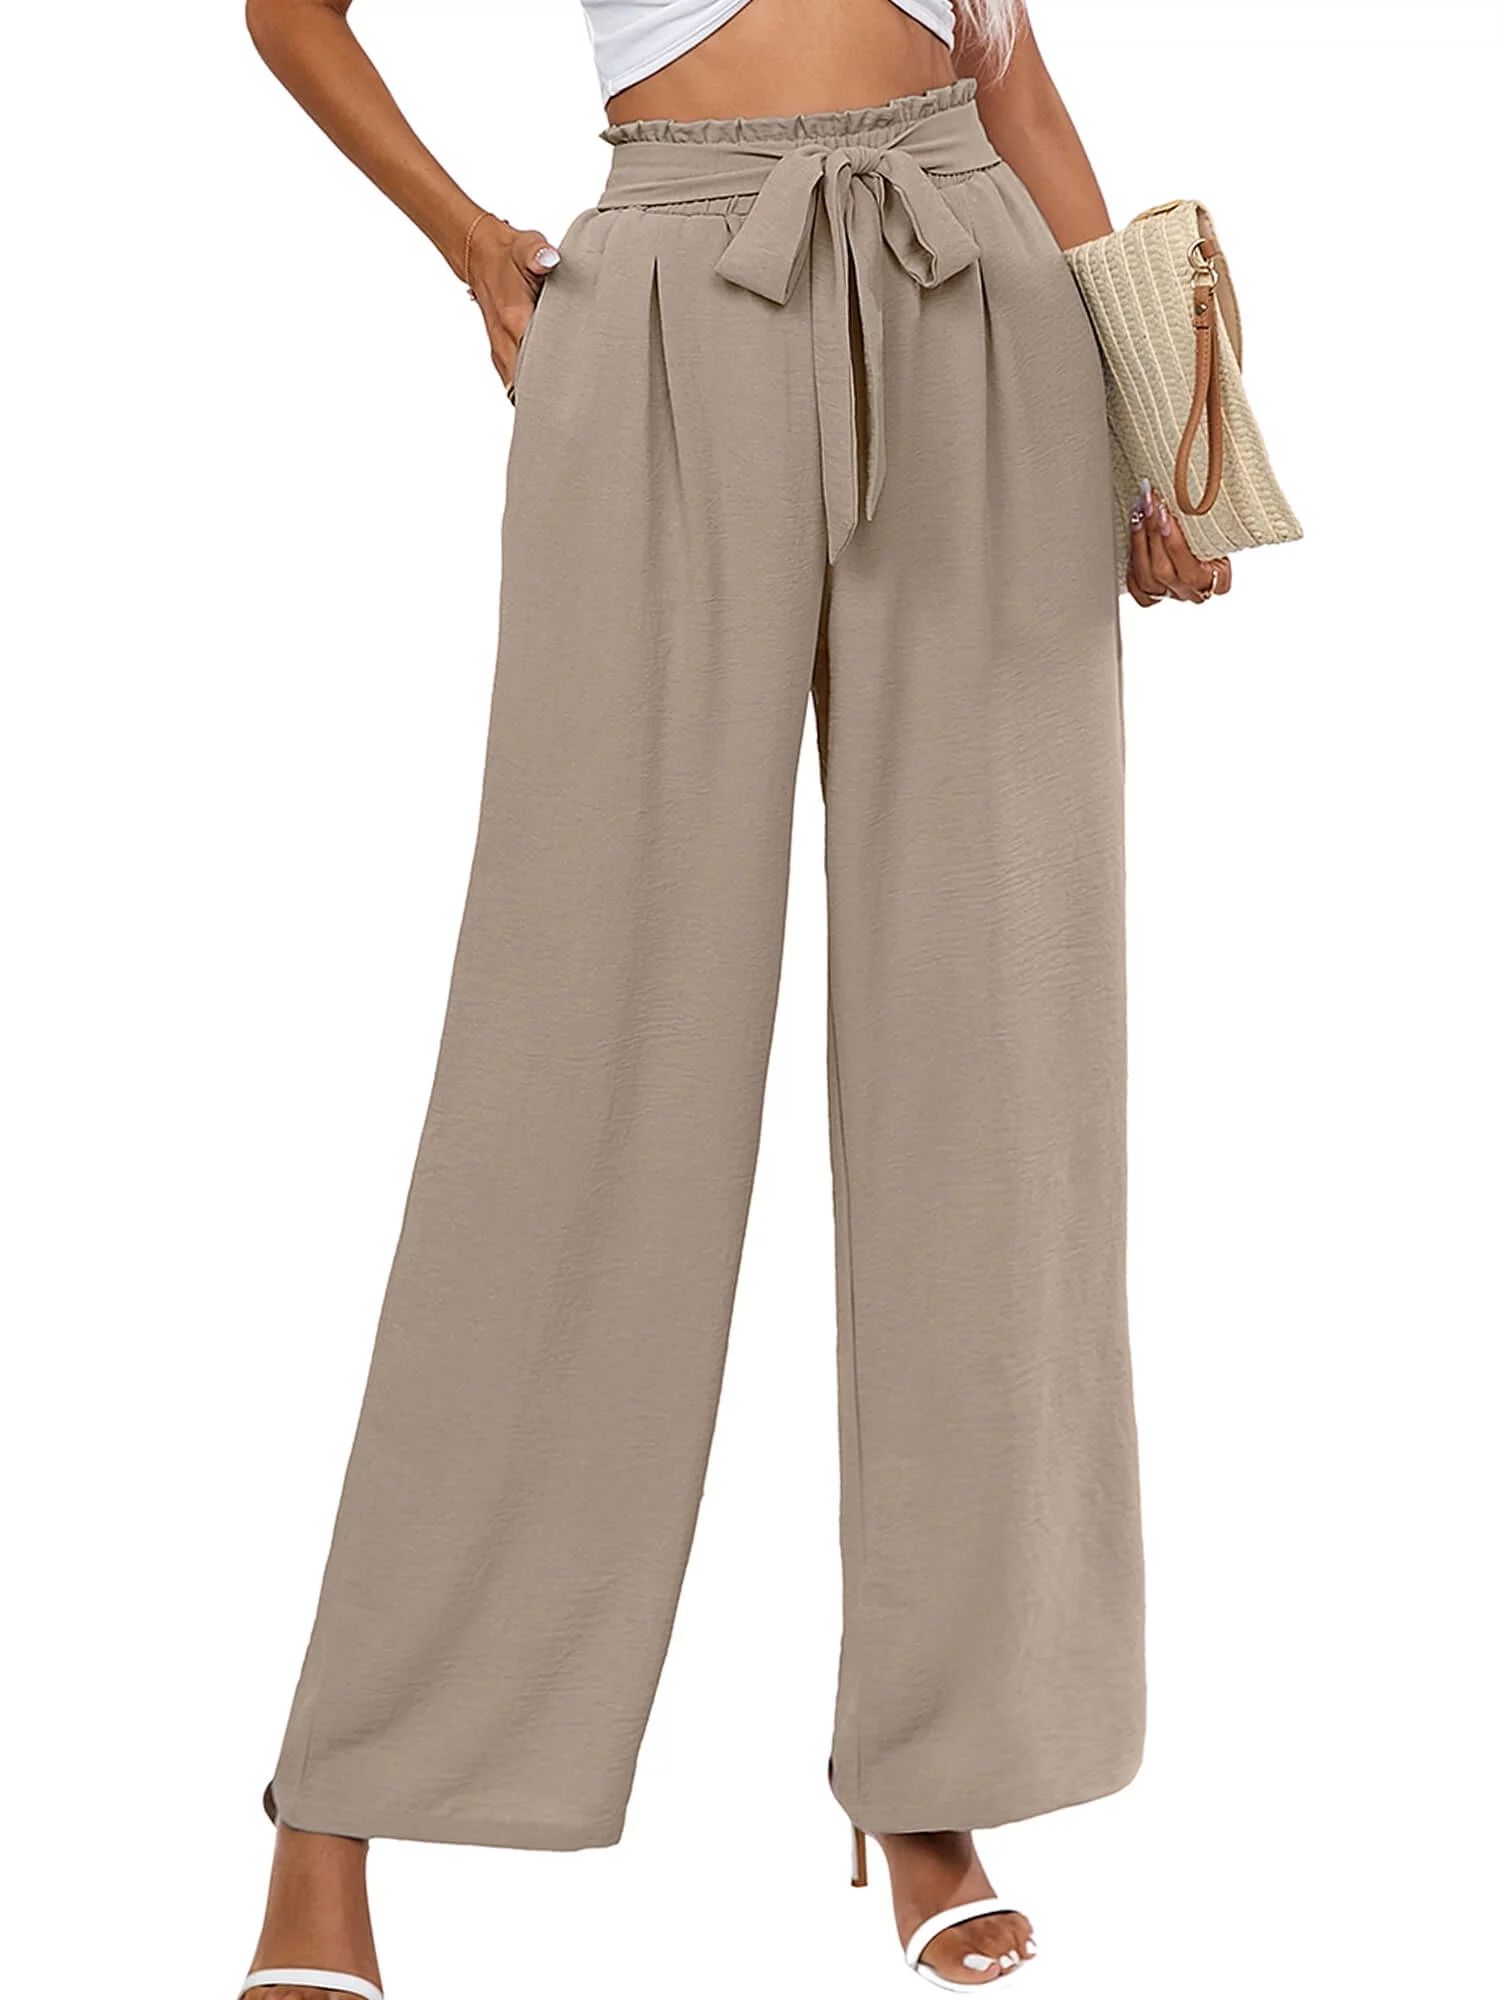 Chiclily Women's Wide Leg Lounge Pants with Pockets Lightweight High Waisted Adjustable Tie Knot ... | Walmart (US)